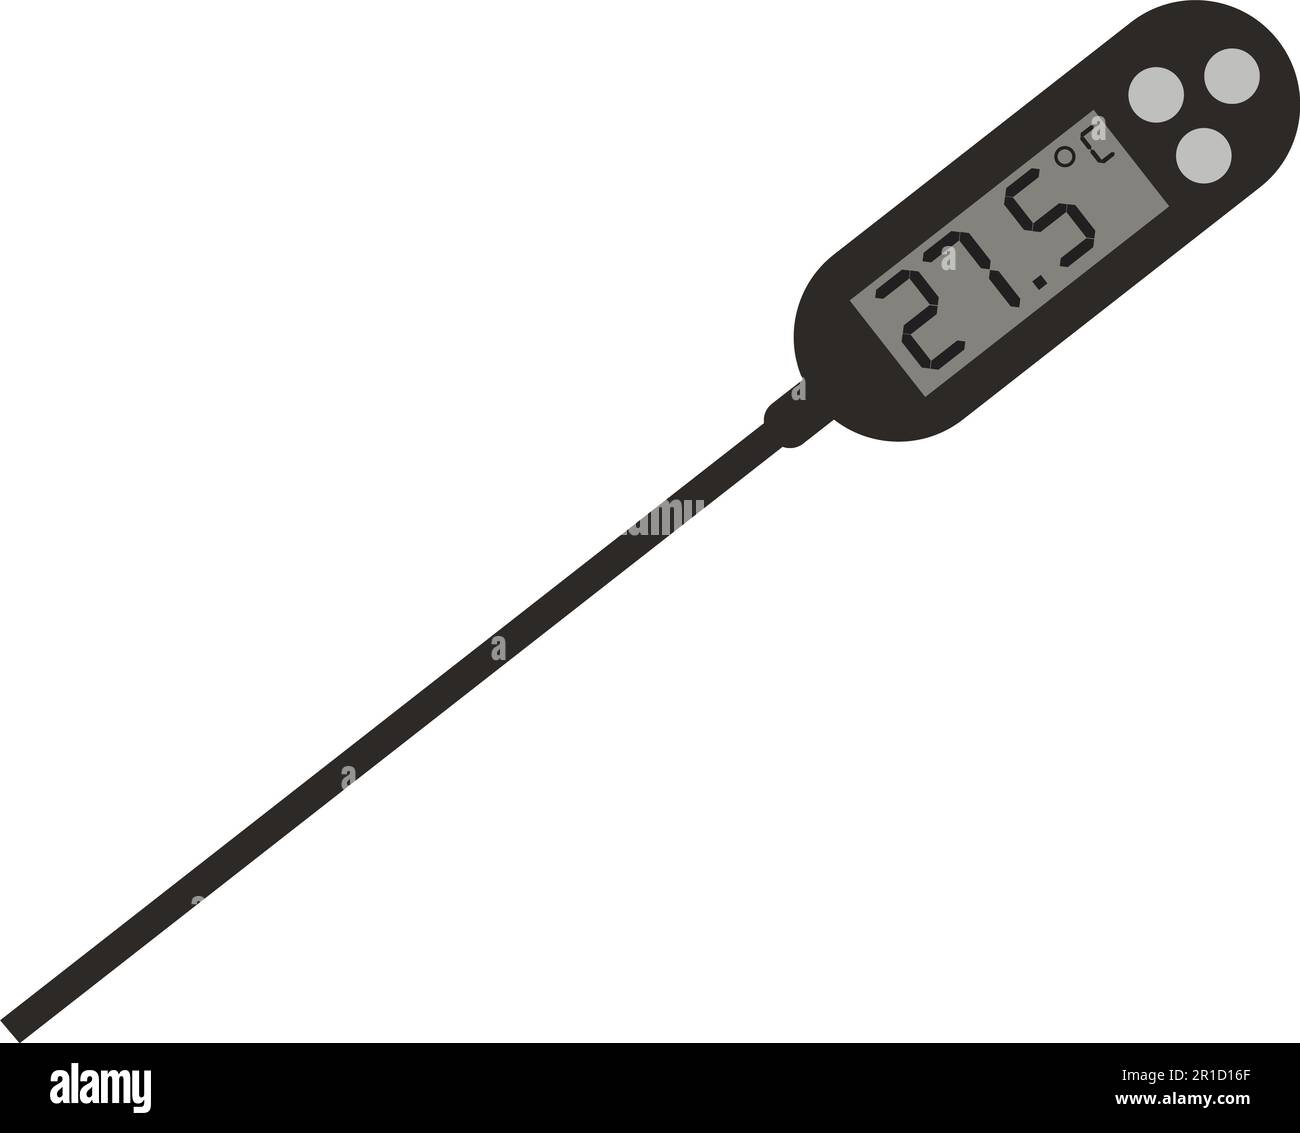 https://c8.alamy.com/comp/2R1D16F/kitchen-thermometer-icon-on-white-background-laboratory-thermometer-food-temperature-flat-style-2R1D16F.jpg